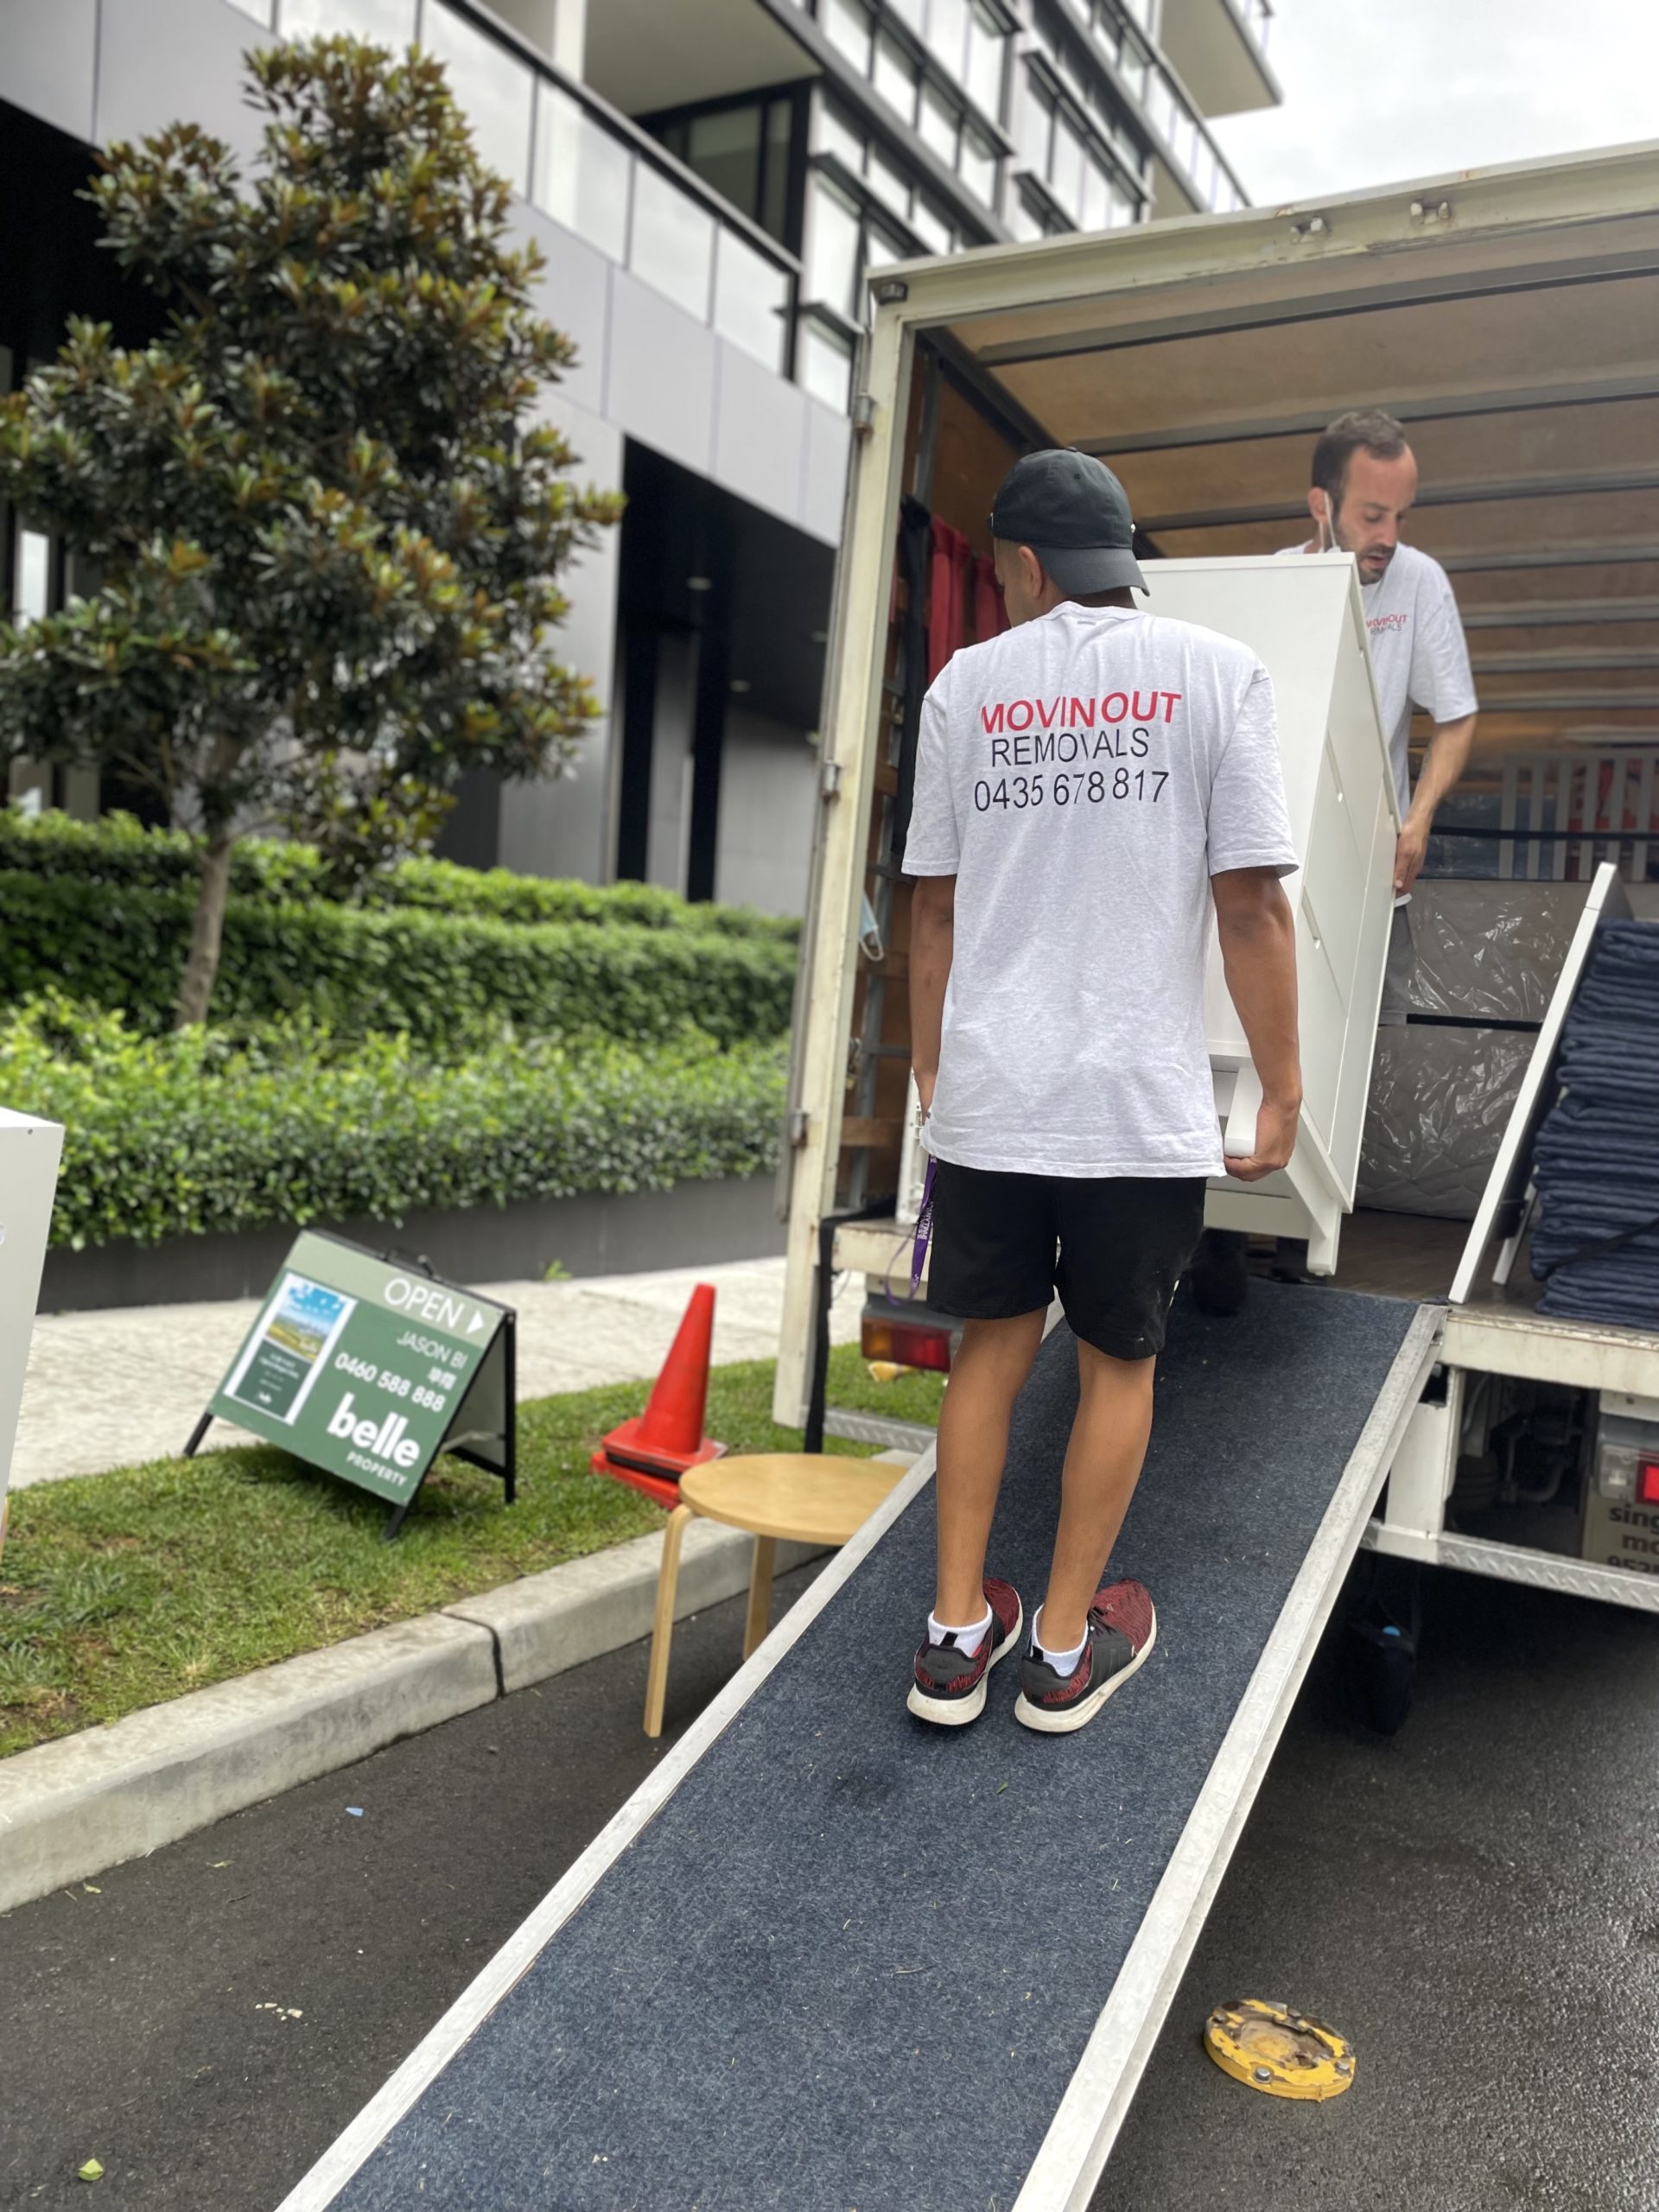 Sydney CDB Removalists packing a removalist truck for a relocation move